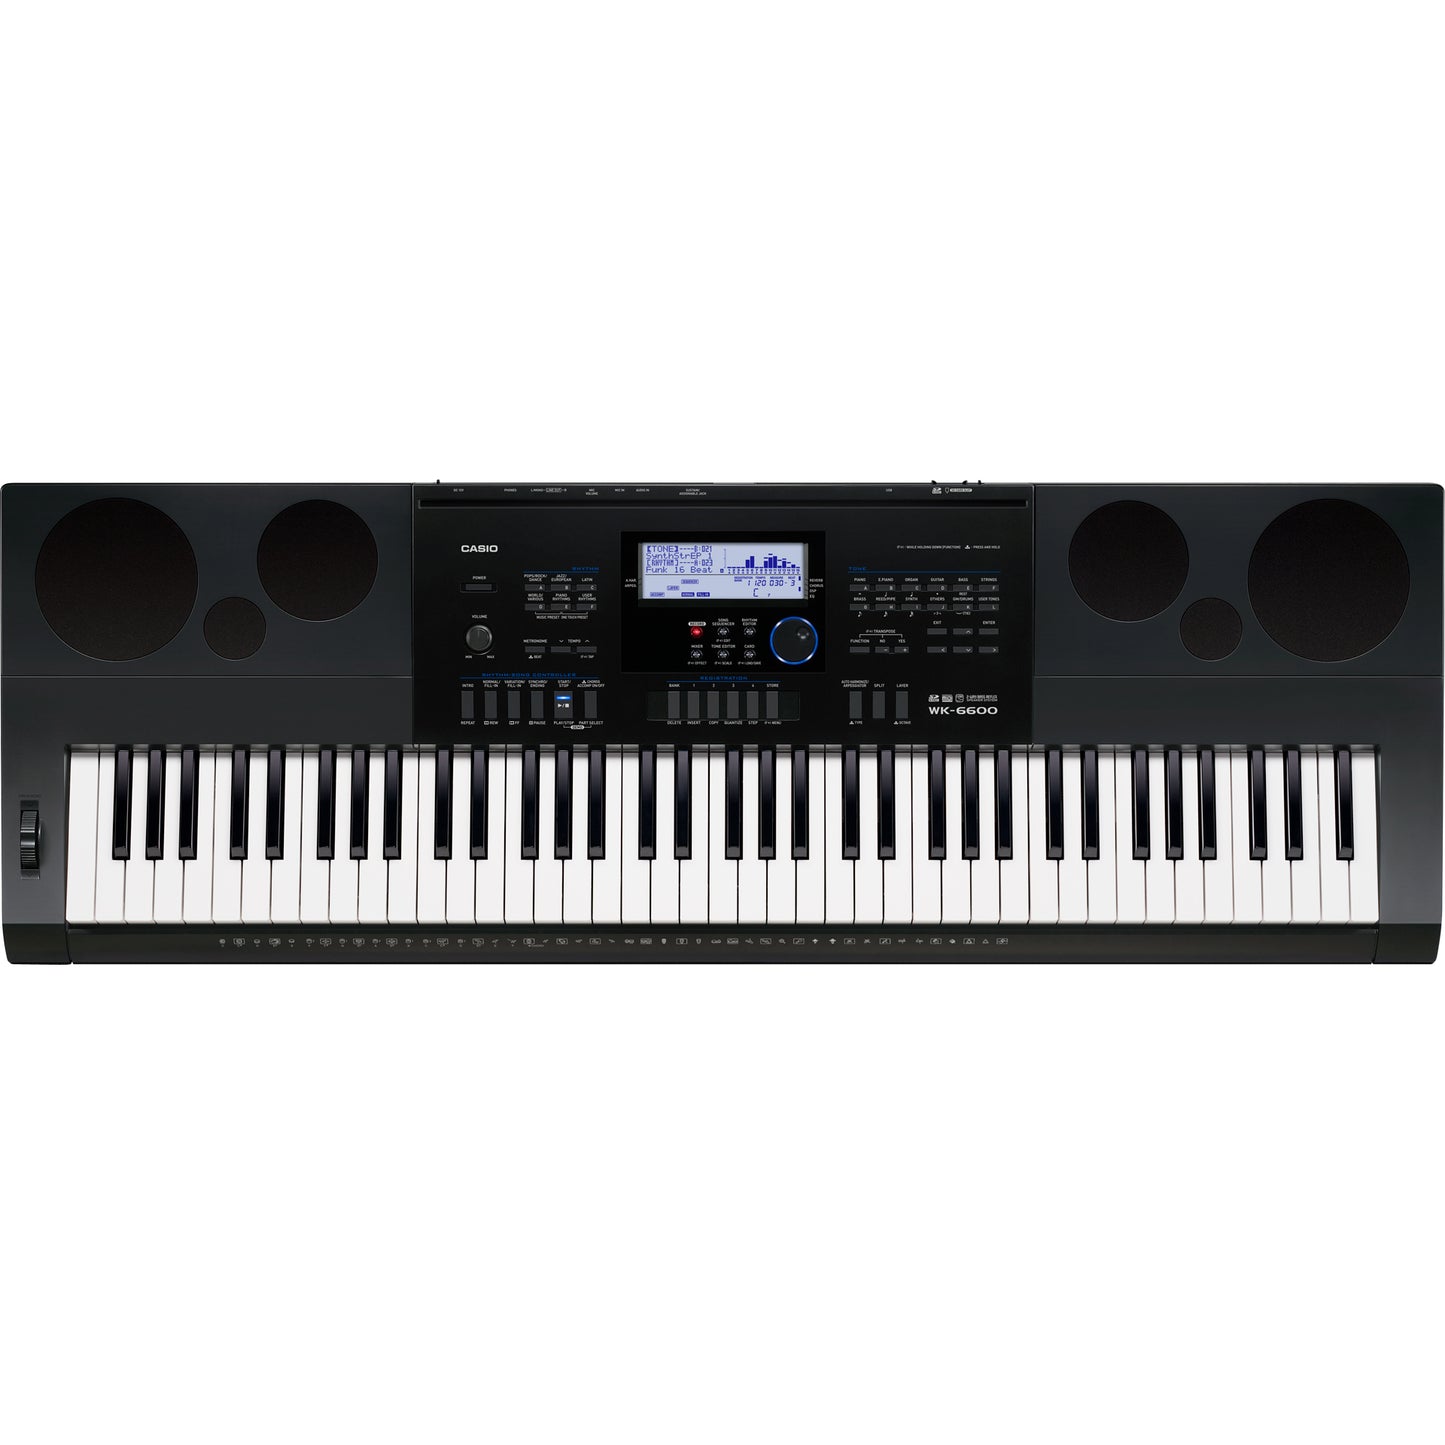 Casio WK-6600 - Workstation Keyboard with Sequencer and Mixer